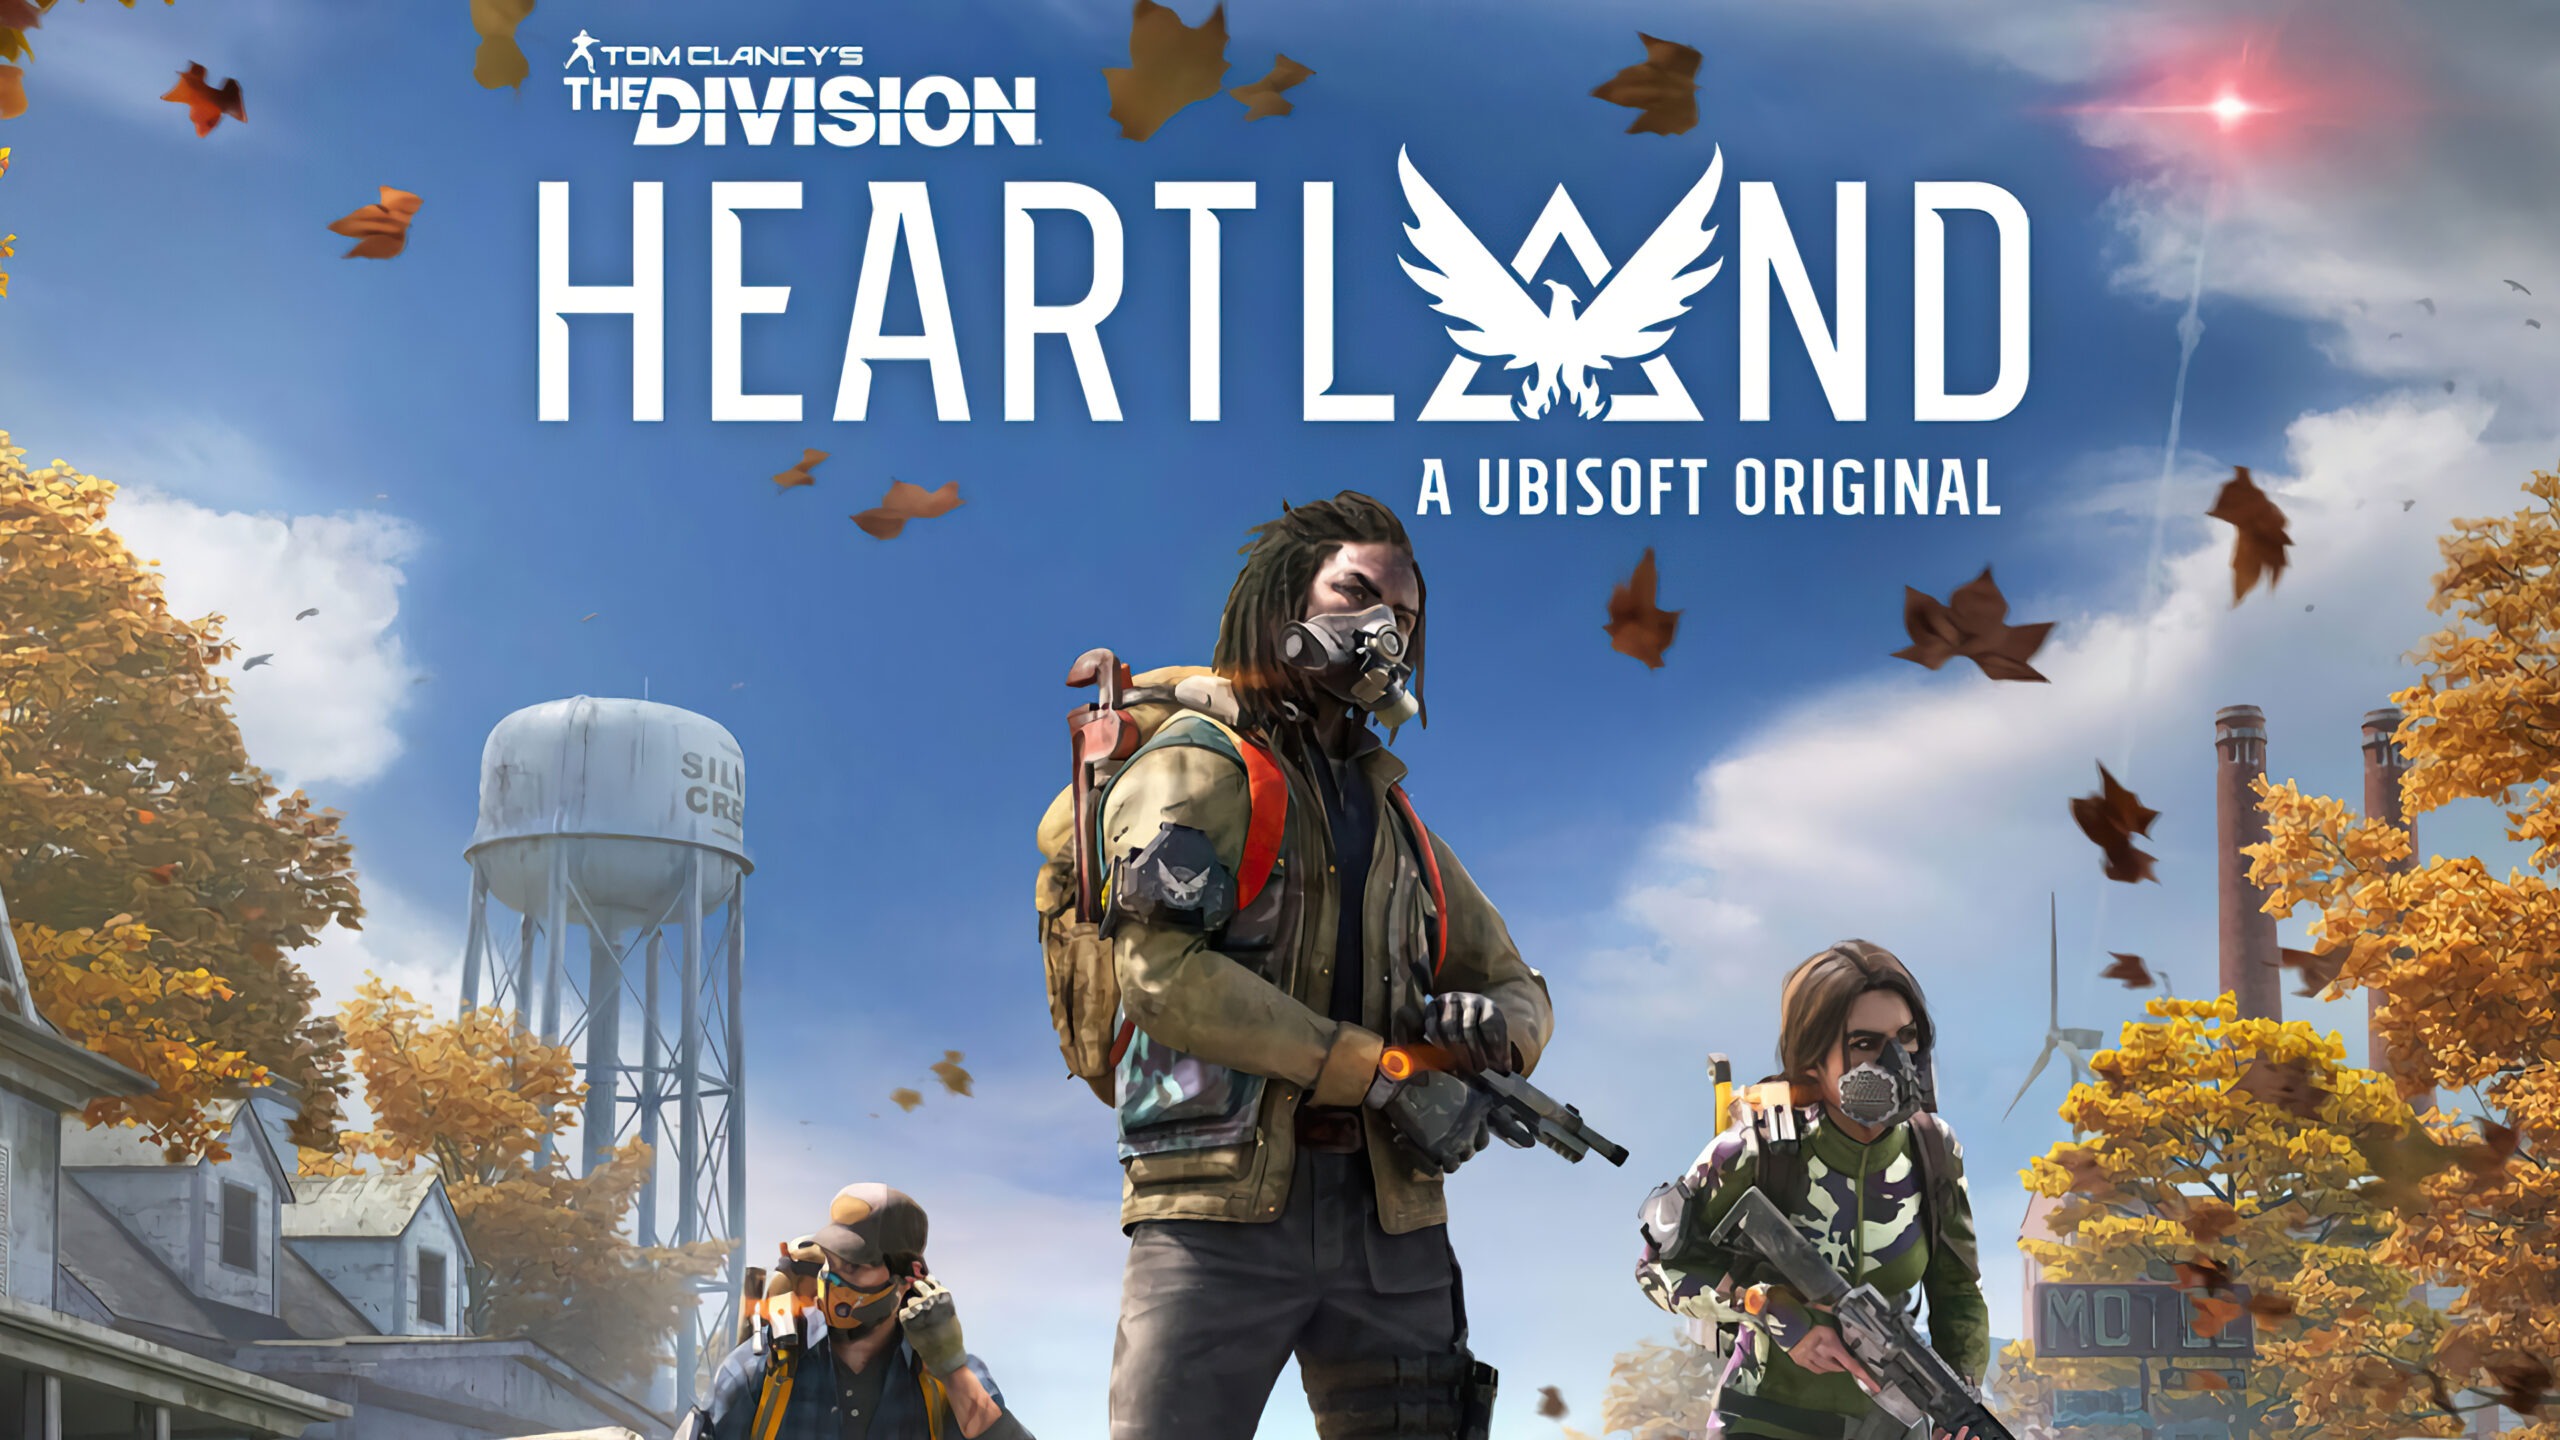 Tom Clancy’s The Division Heartland has been cancelled by Ubisoft